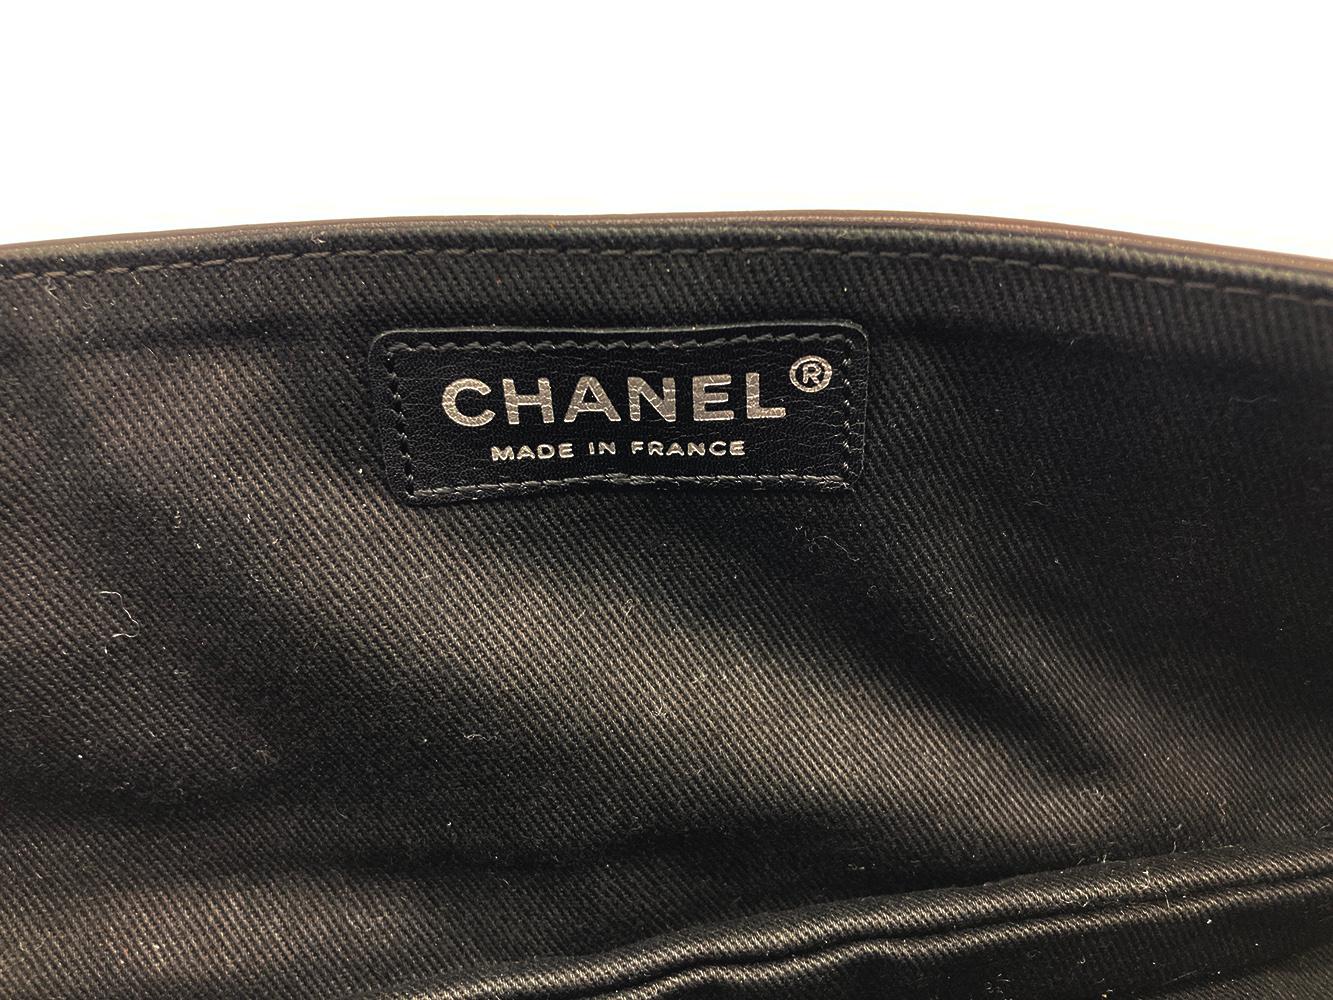 Limited Edition Chanel Black Leather Crystal Grommet Clutch 6